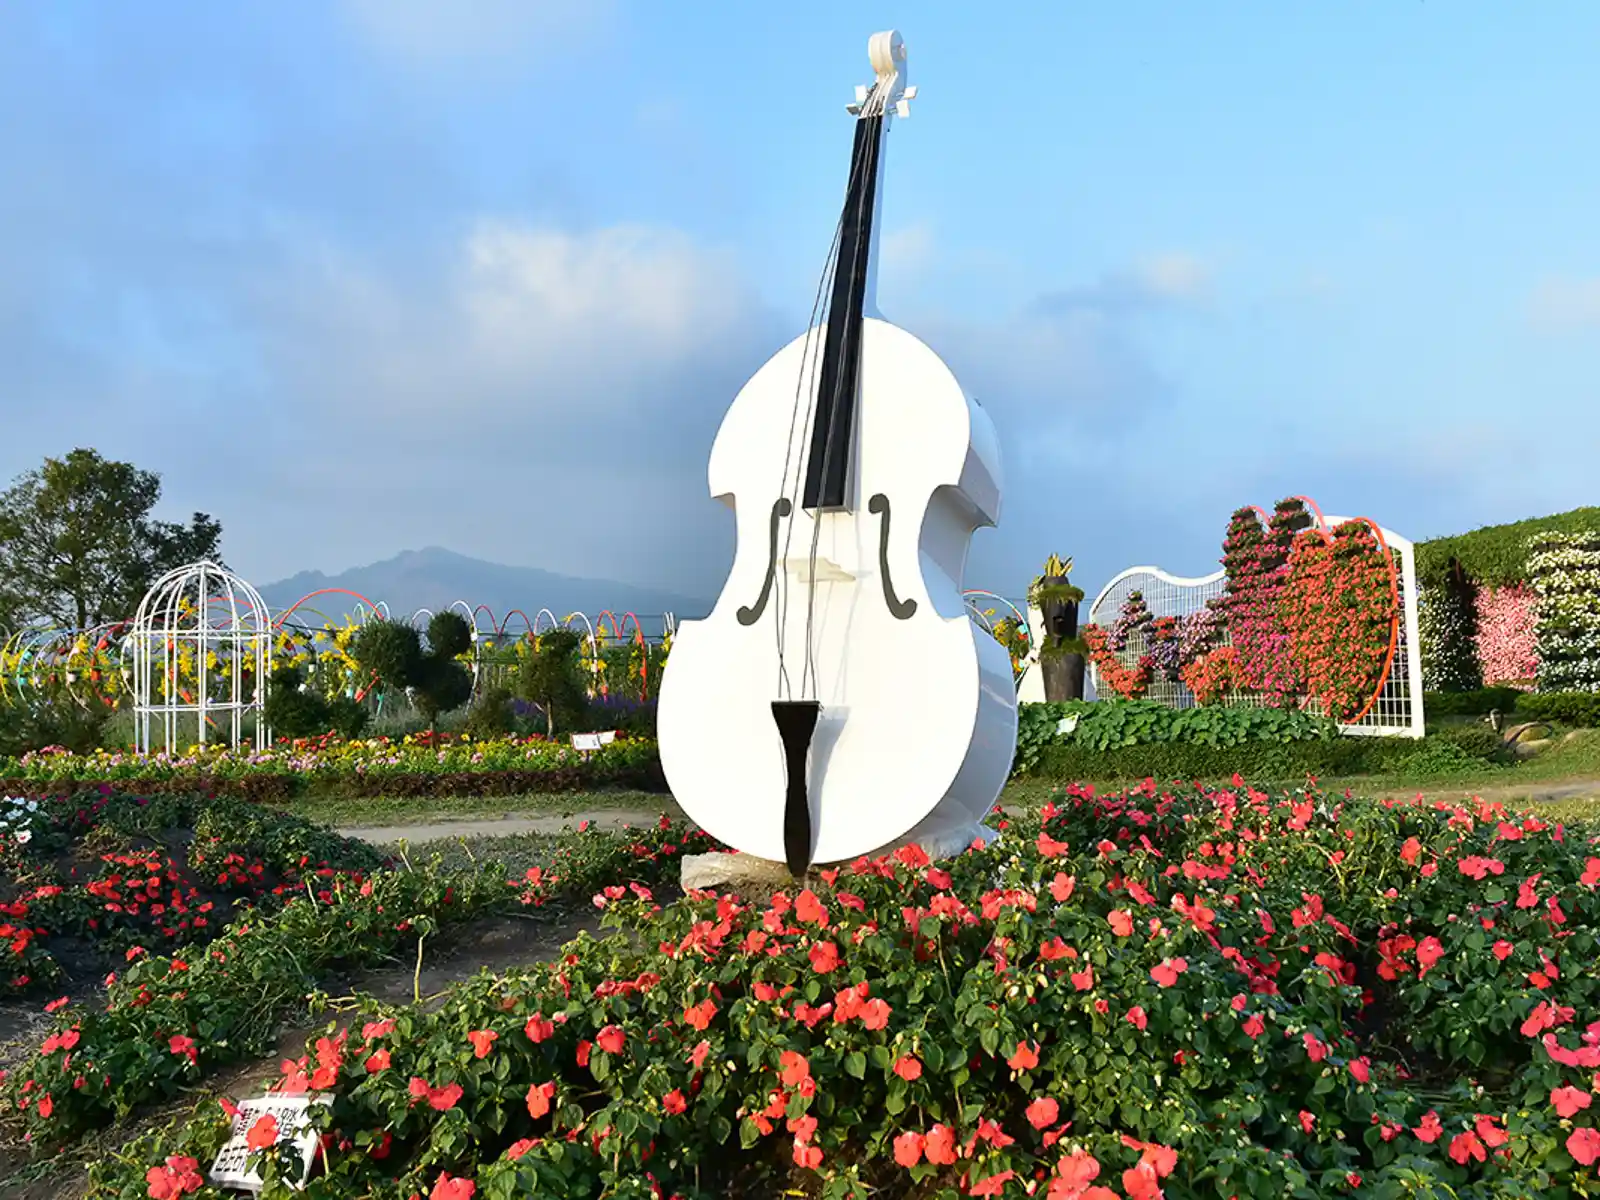 A statue of an upright bass is in one of the flower fields.